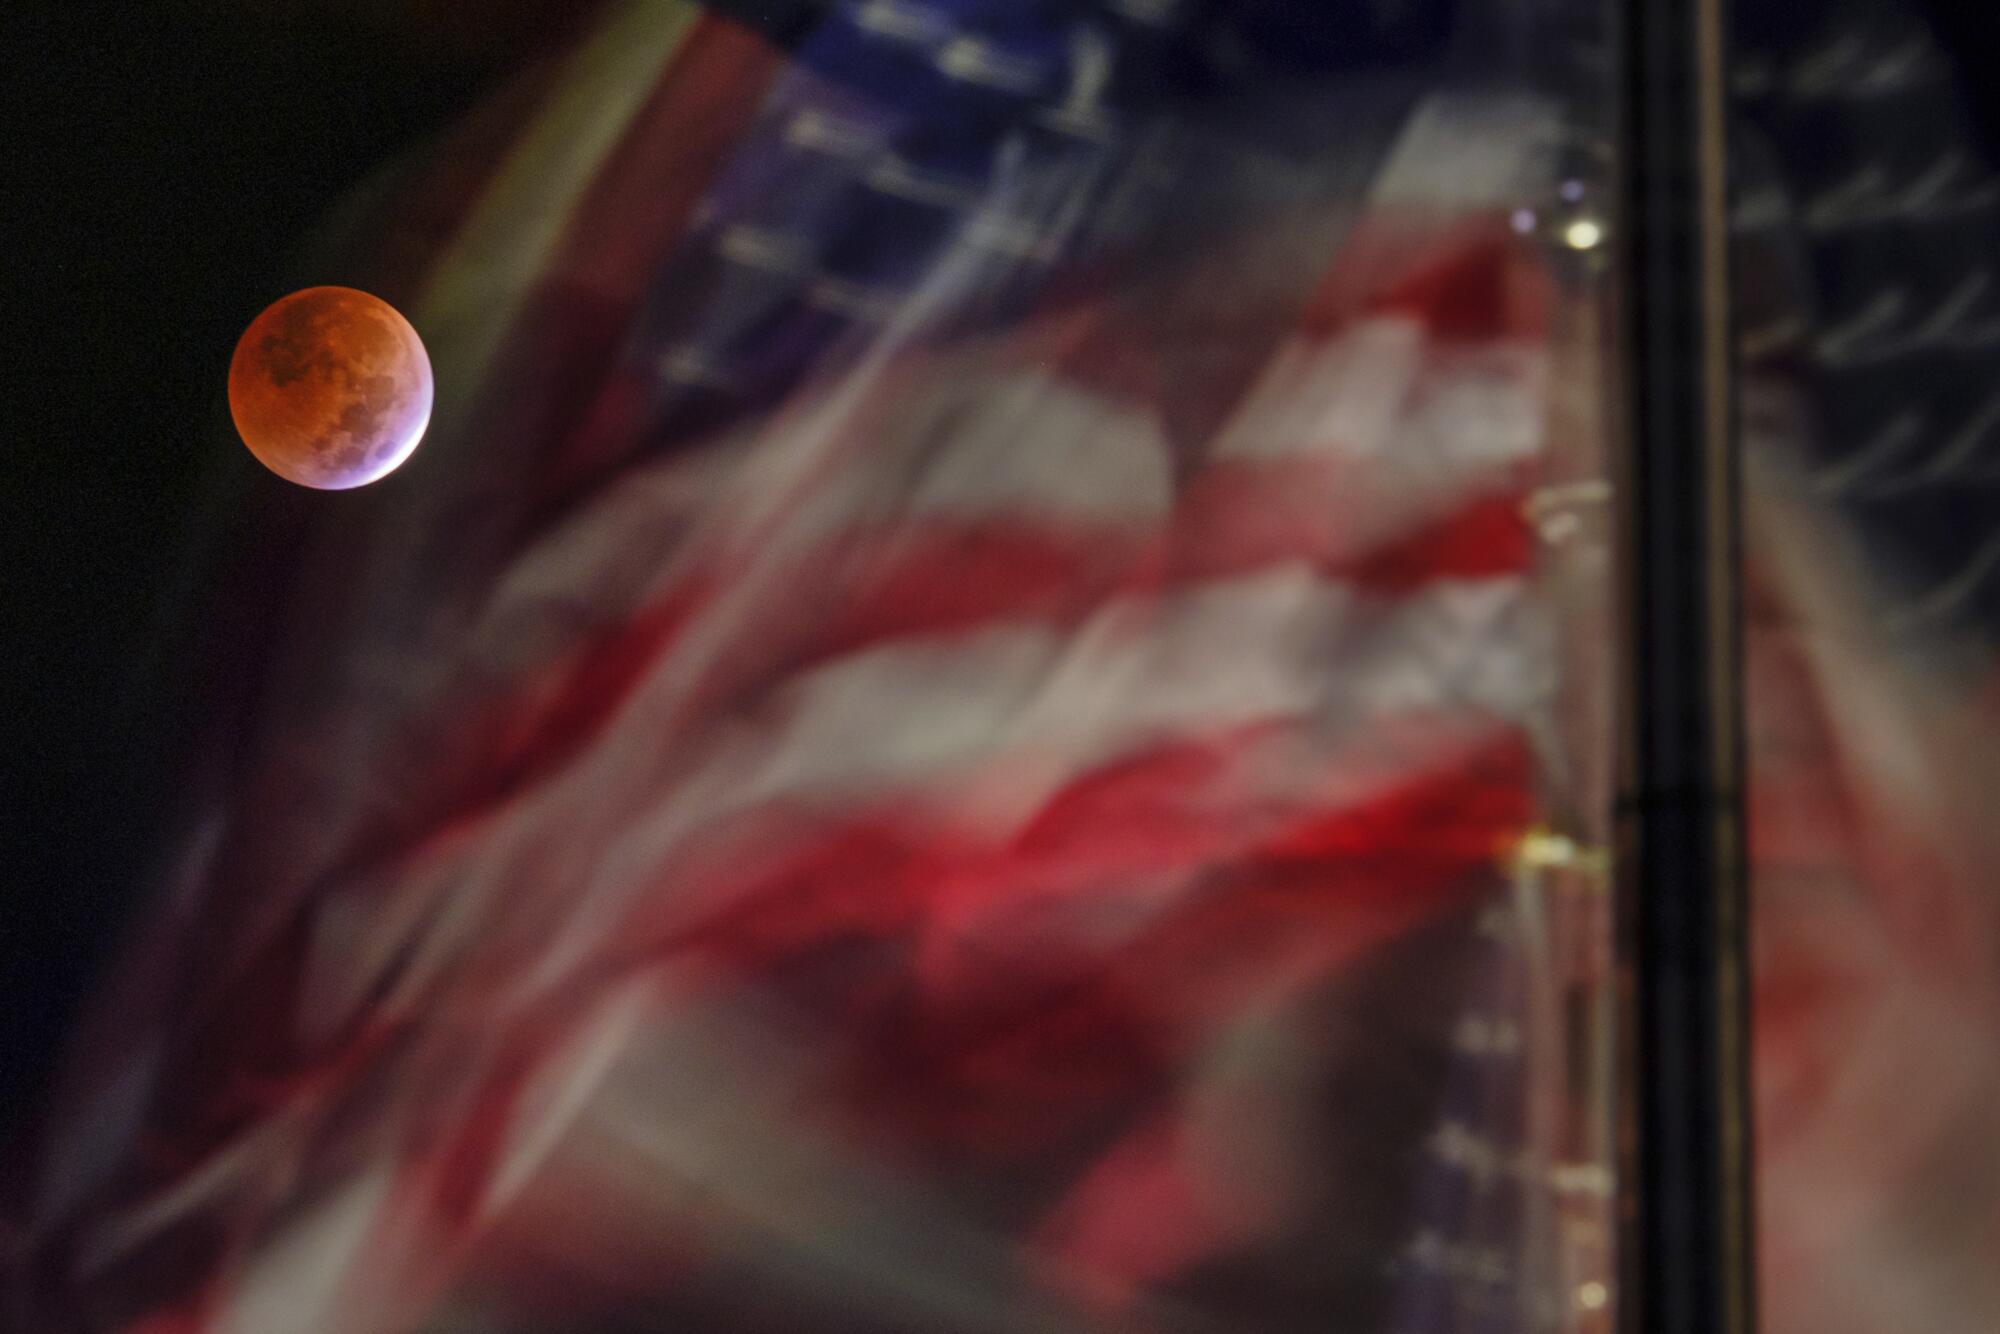 The full blood moon caused by the lunar eclipse is framed by the US Flags blowing in the breeze on the National Mall